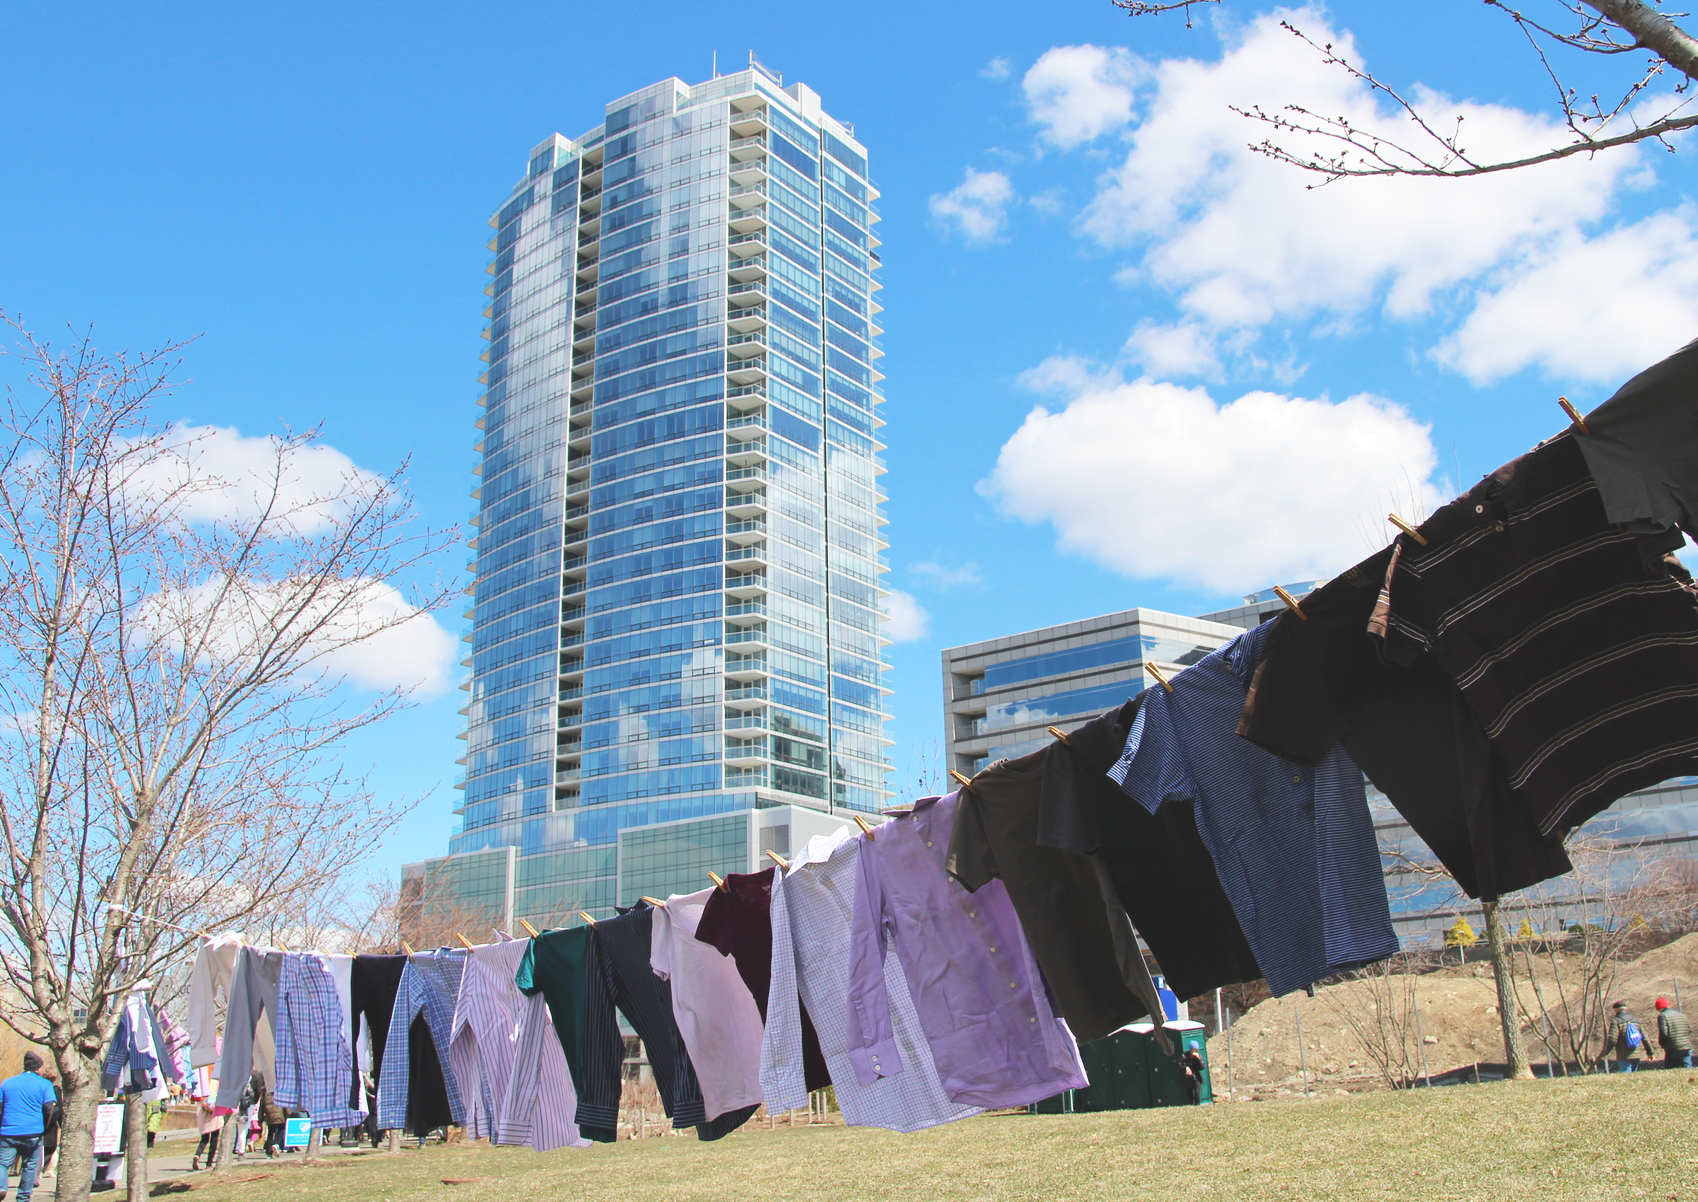 96 shirts were strung on clothes line on the periphery of Mill River Park, with Trump Parc Stamford in the background. March 24, 2018 Photo: Leslie Yager